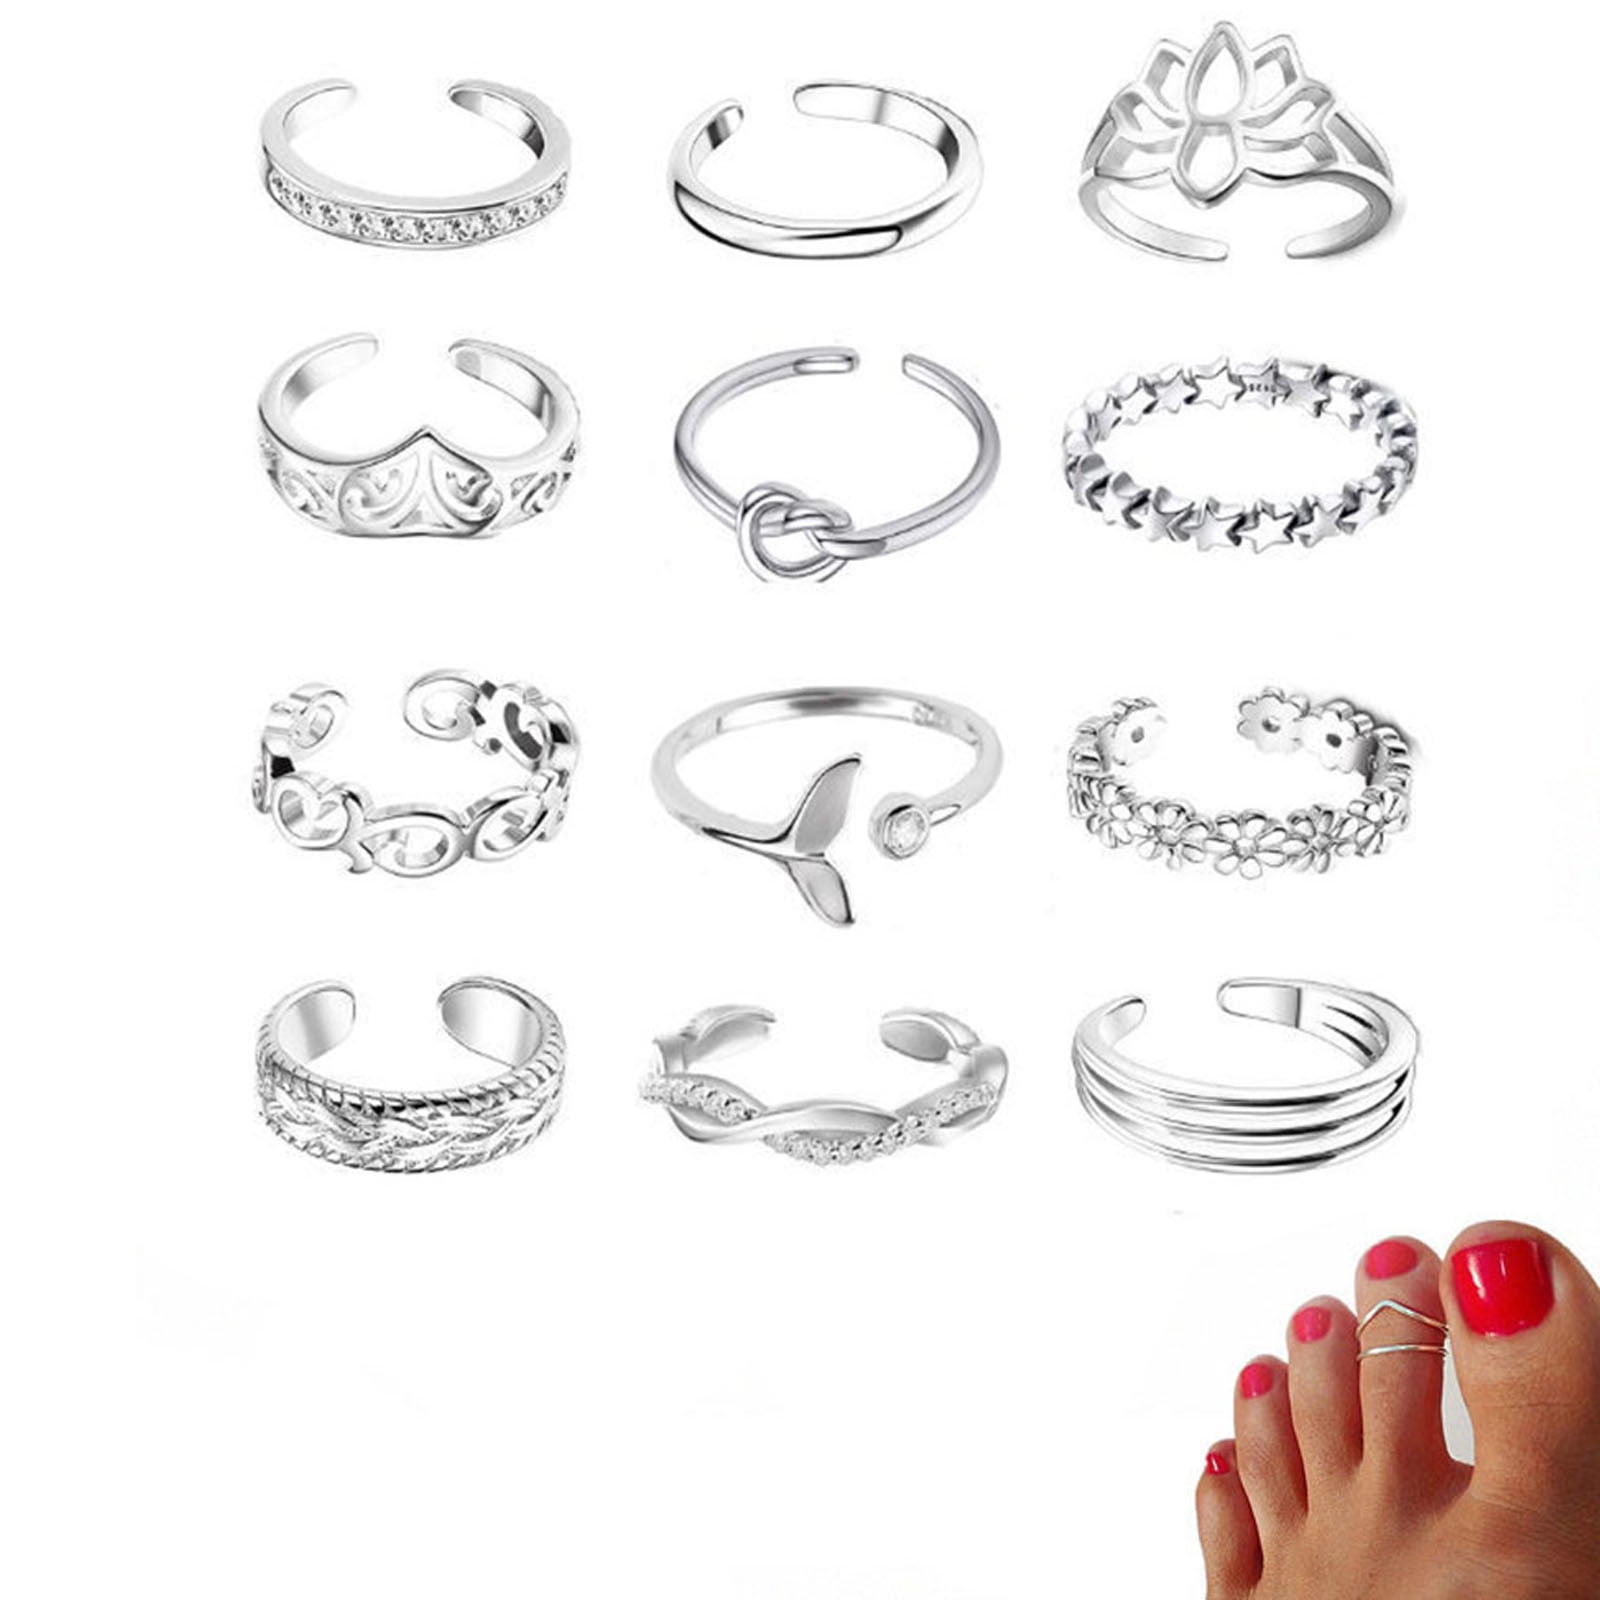 YOZUMD Toe Ring,Women's Fashion Hollow Adjustable Beach Jewelry Open Toe  Ring for Party Gifts 